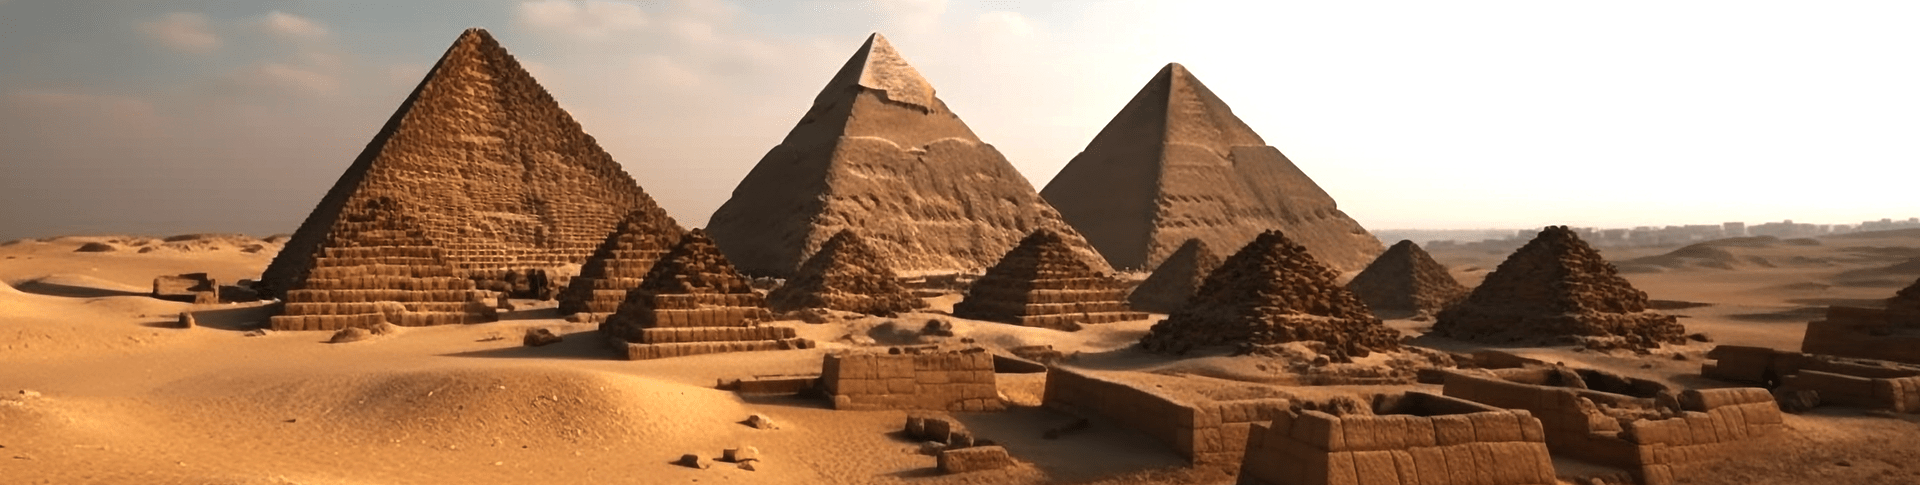 Egypt Best Tour Package Provider in Doha Qatar | Best Tours in Cairo